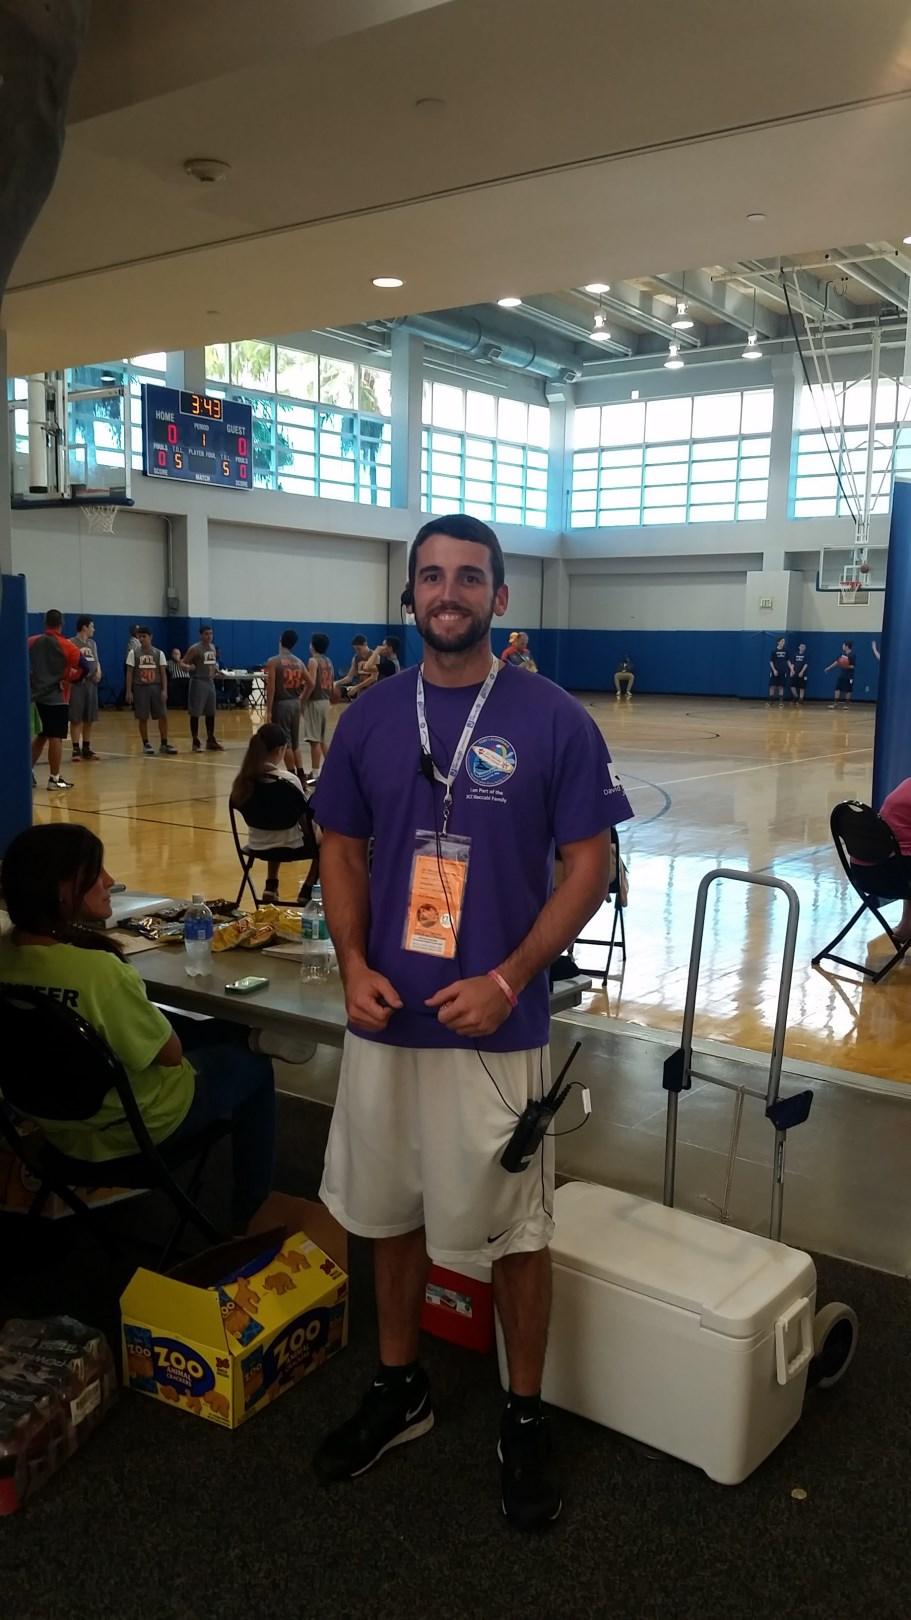 MACCABI GAMES INTERNSHIP PROVES TO BE A GREAT EXPERIENCE FOR KRIS KELLEHER Kris Kelleher s internship at the RecPlex last year proved to be a valuable asset for the Maccabi Games at the David Posnack